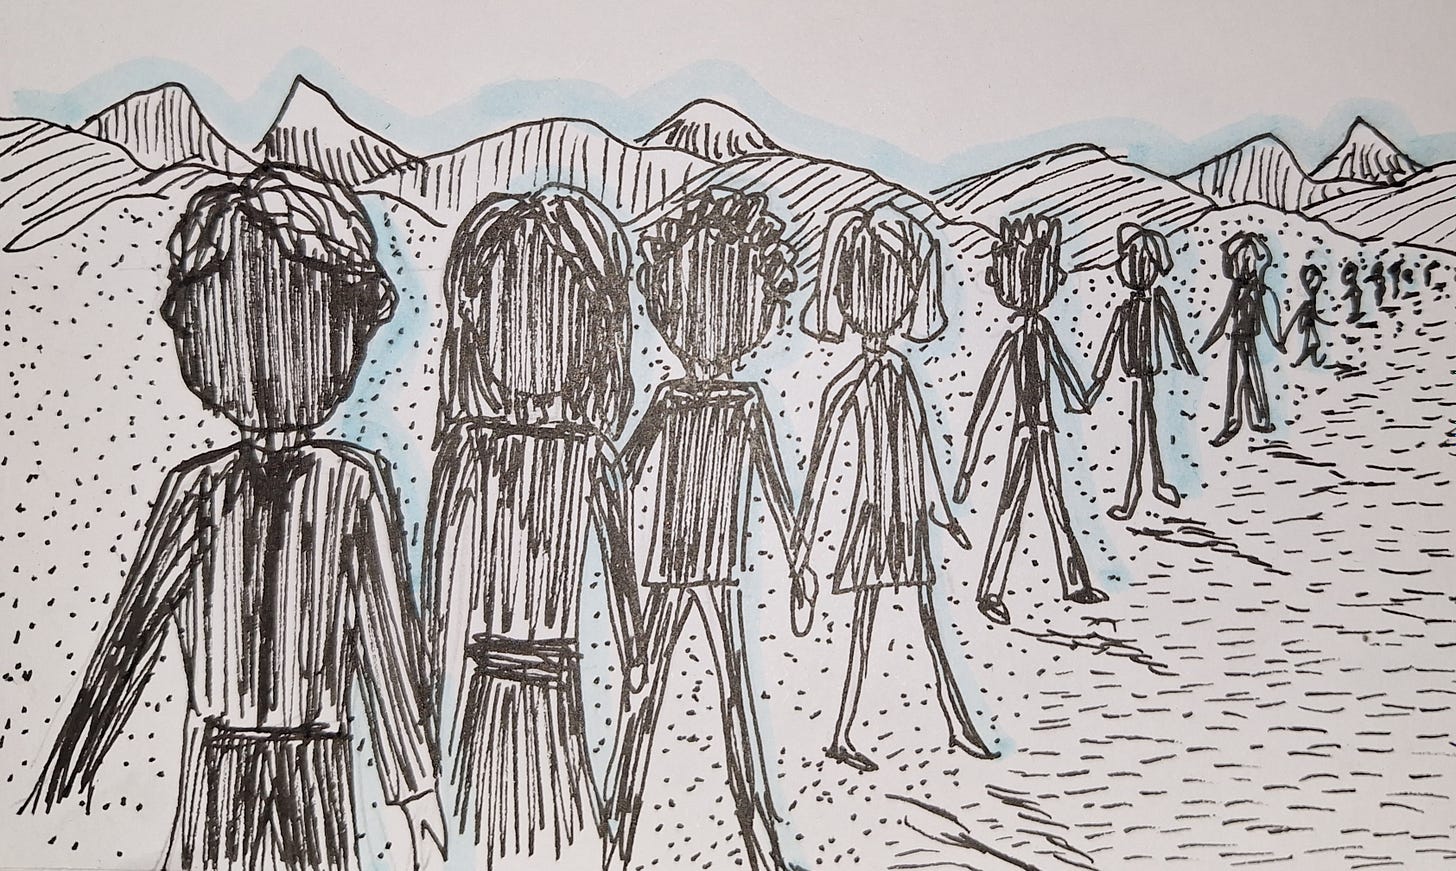 Pen and ink sketch of a variety of people in silhoutte, stretching into the distance.  Mountains beynd.  A sci-fi atmosphere.